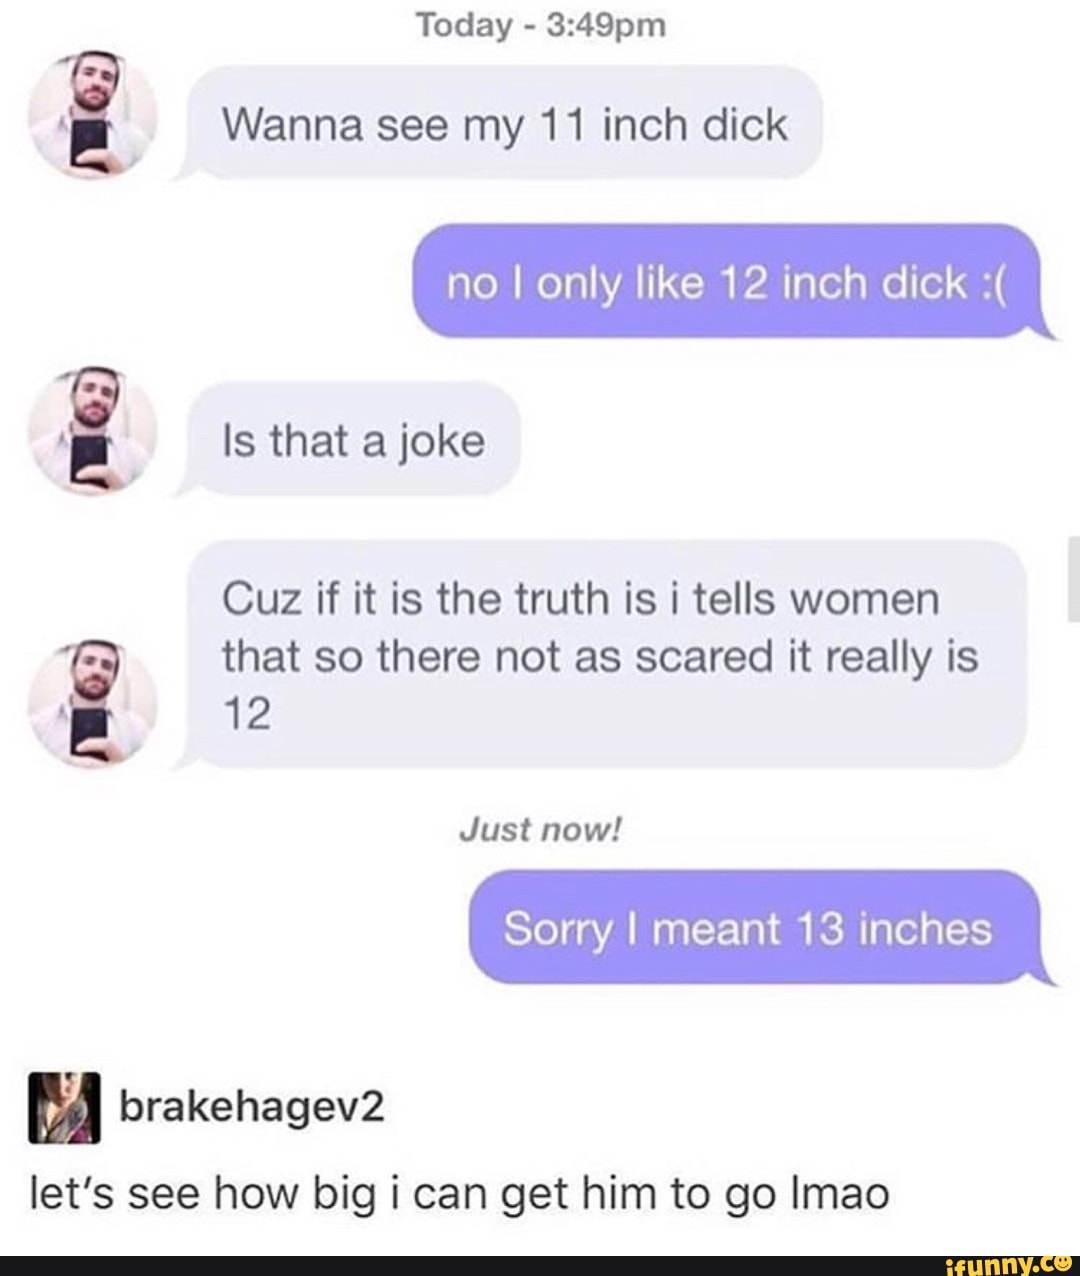 She laughed when he said he has a 12-inch dick